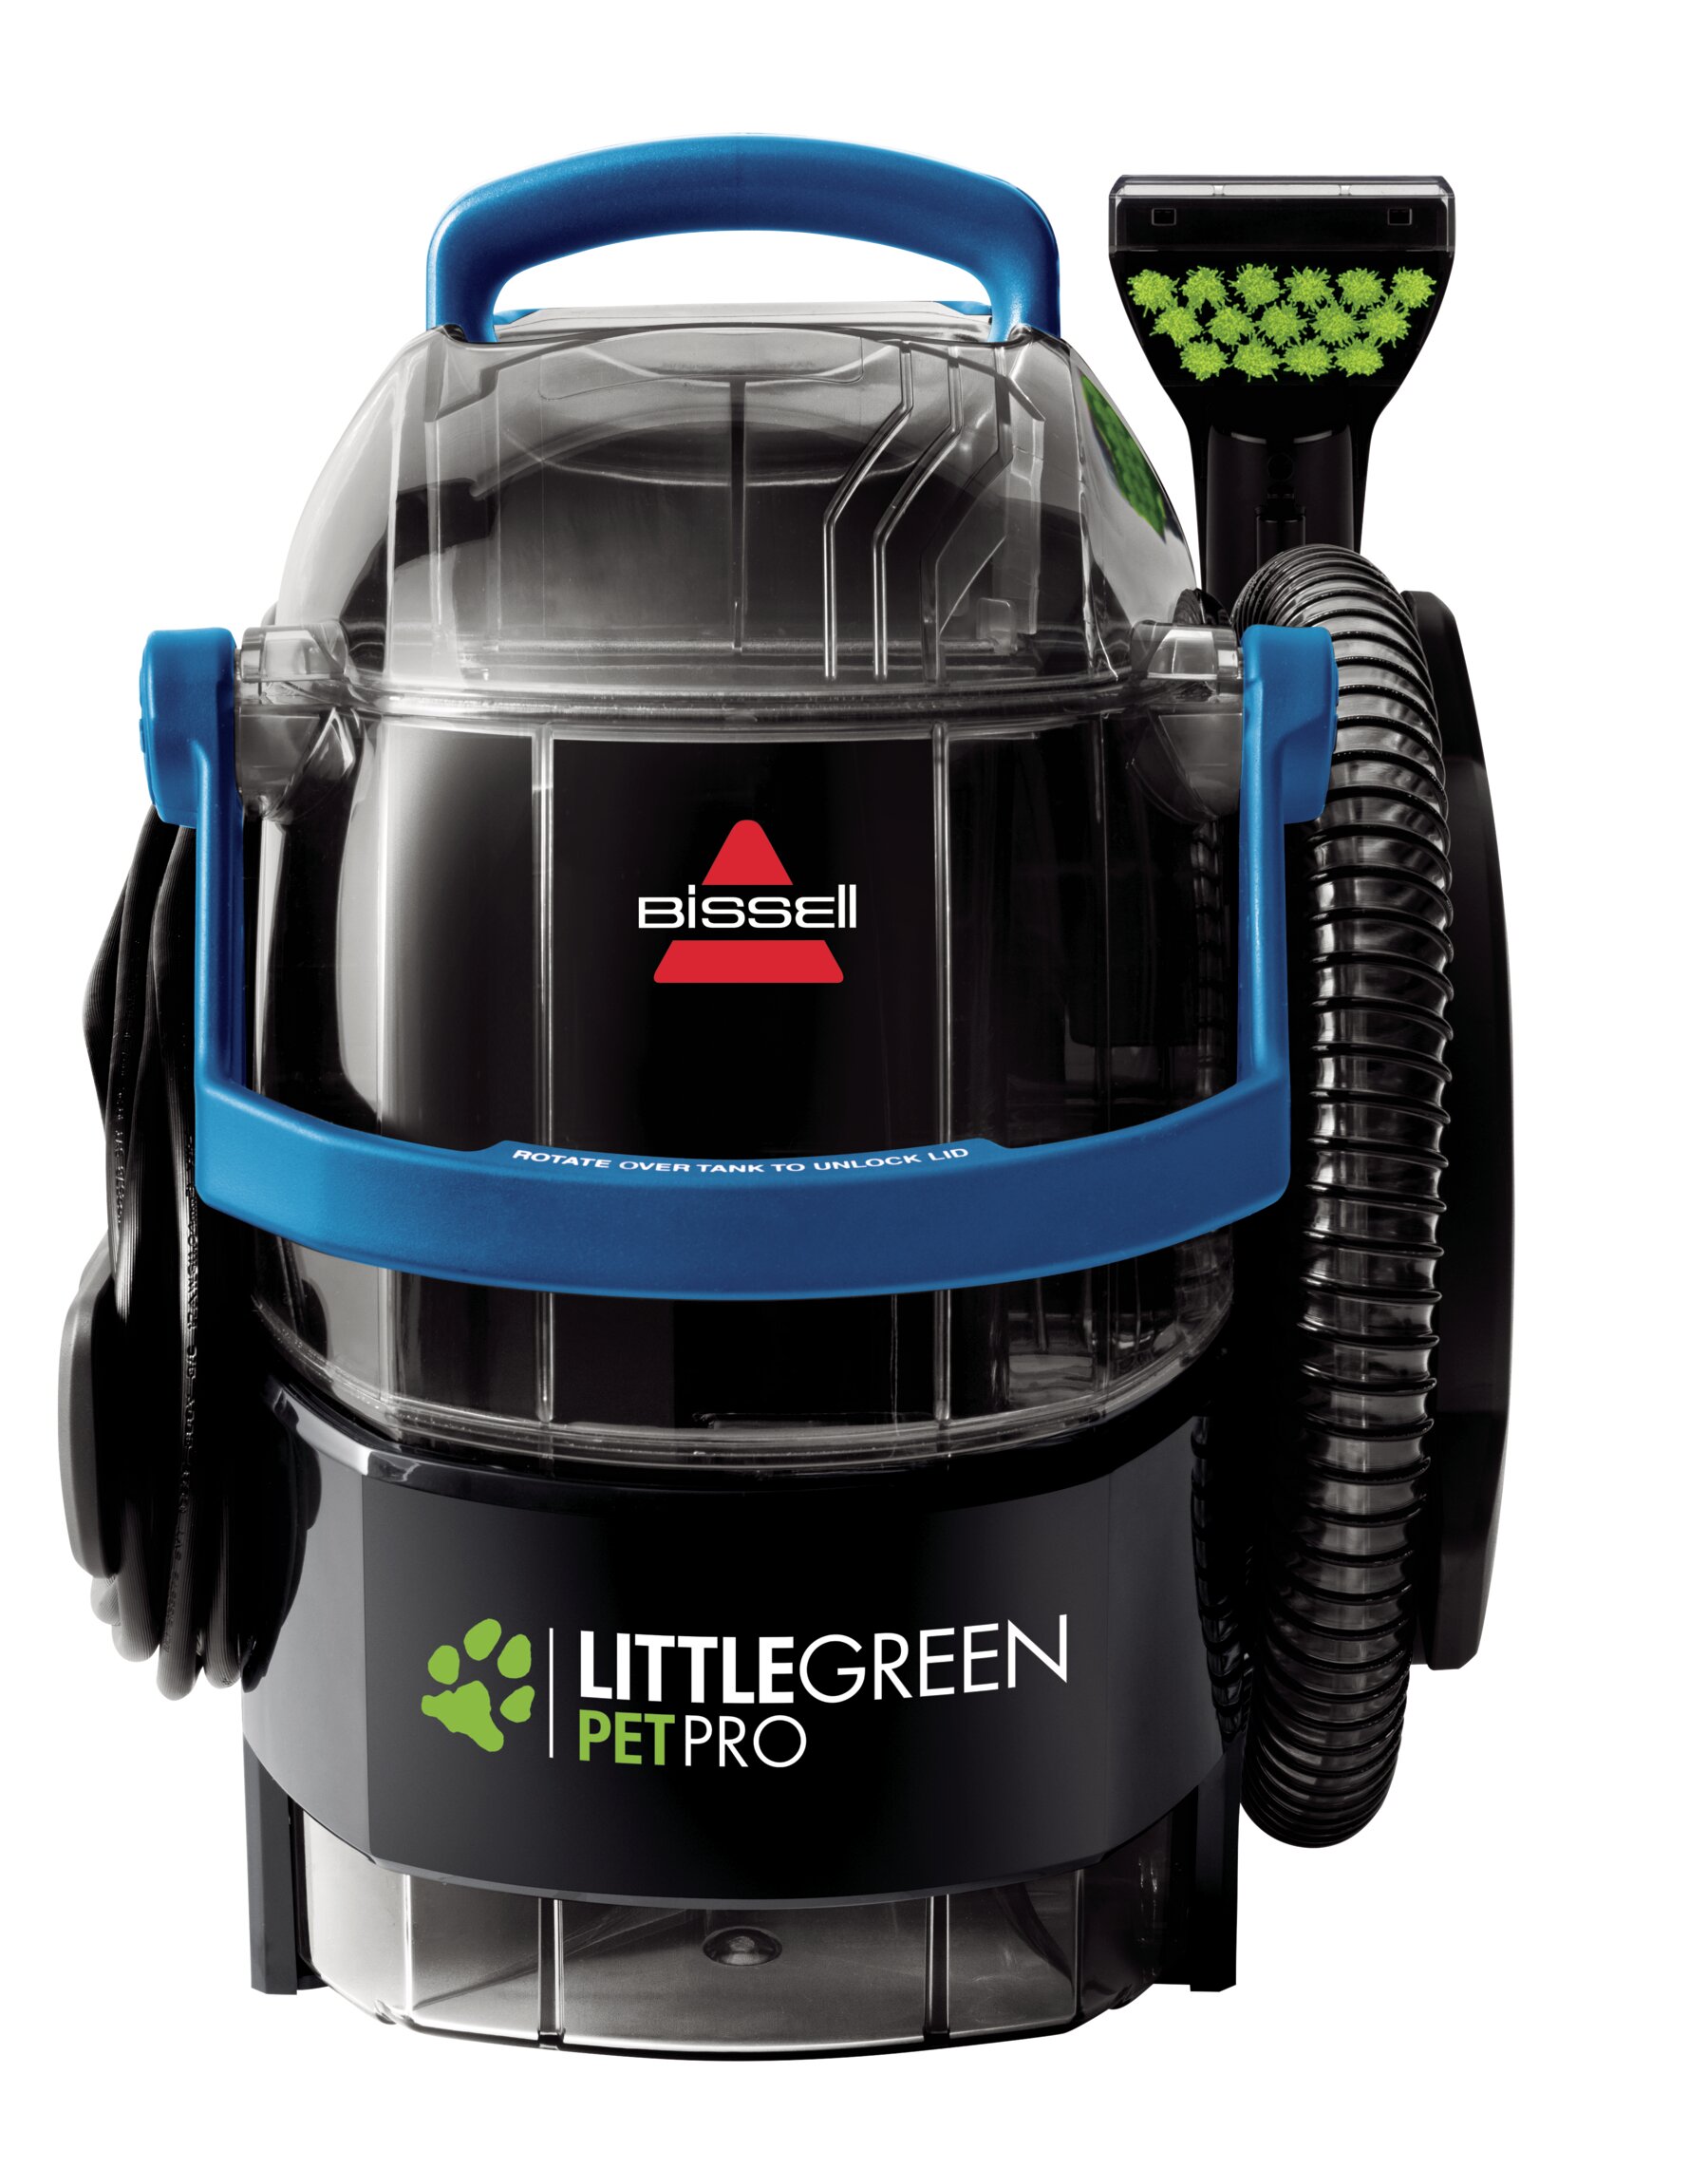 Пылесос pet pro. Bissell SPOTCLEAN. Bissell Portable Compact Deep Carpet spot Cleaner. Bissell little Green clean Machine. Пылесос Bissell SPOTCLEAN Turbo.